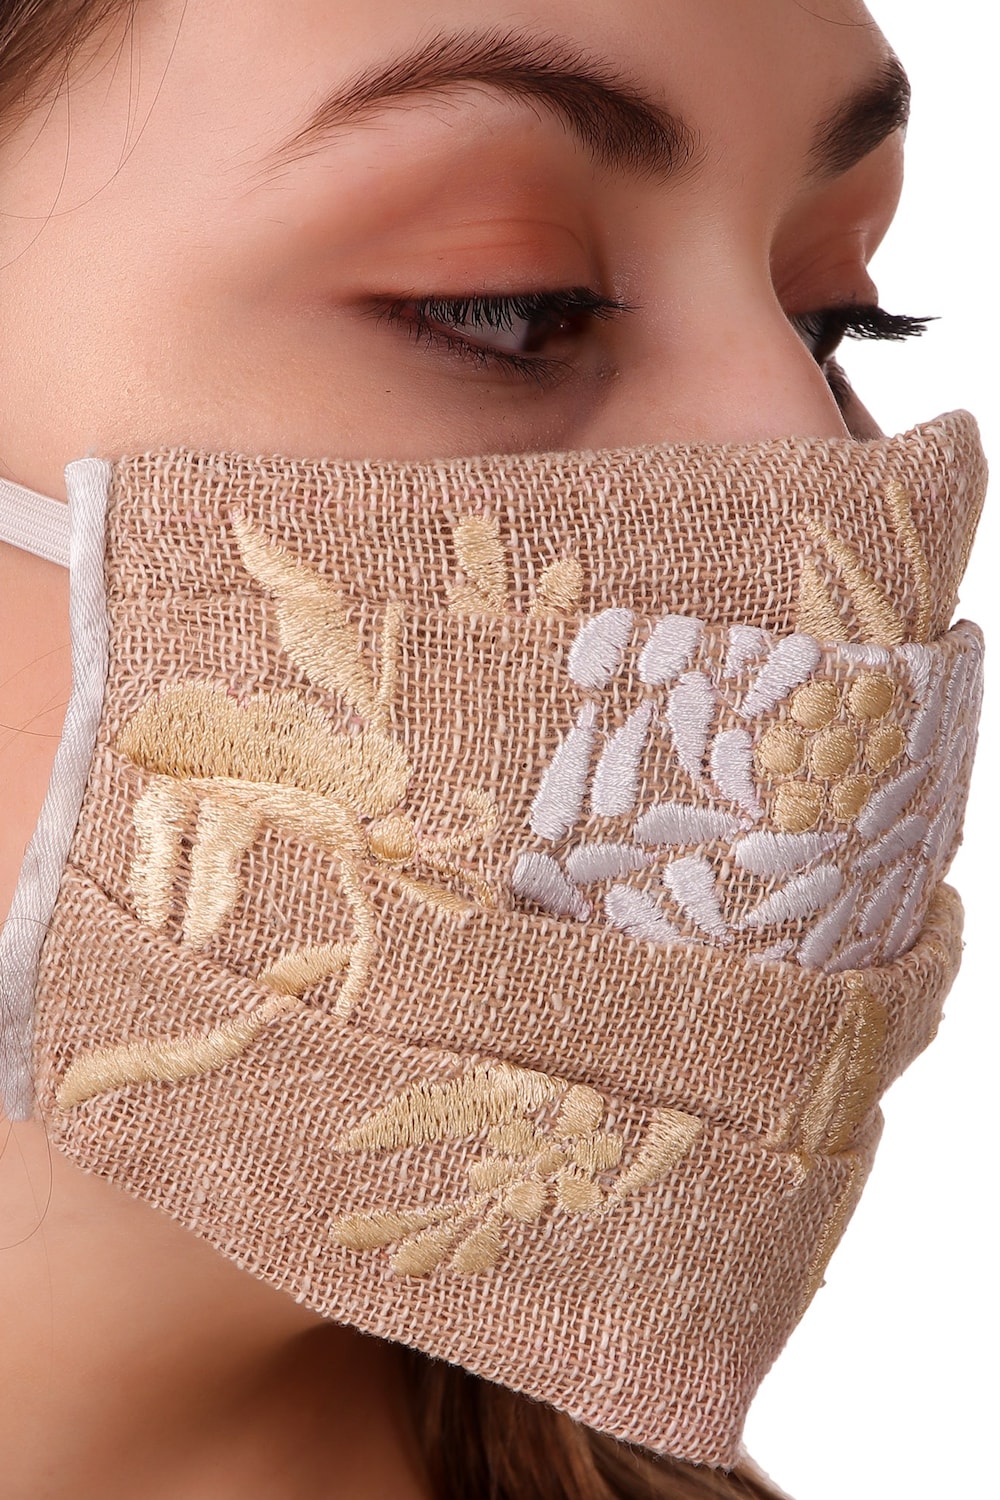 Floral Embroidered Jute Pleated Face Mask